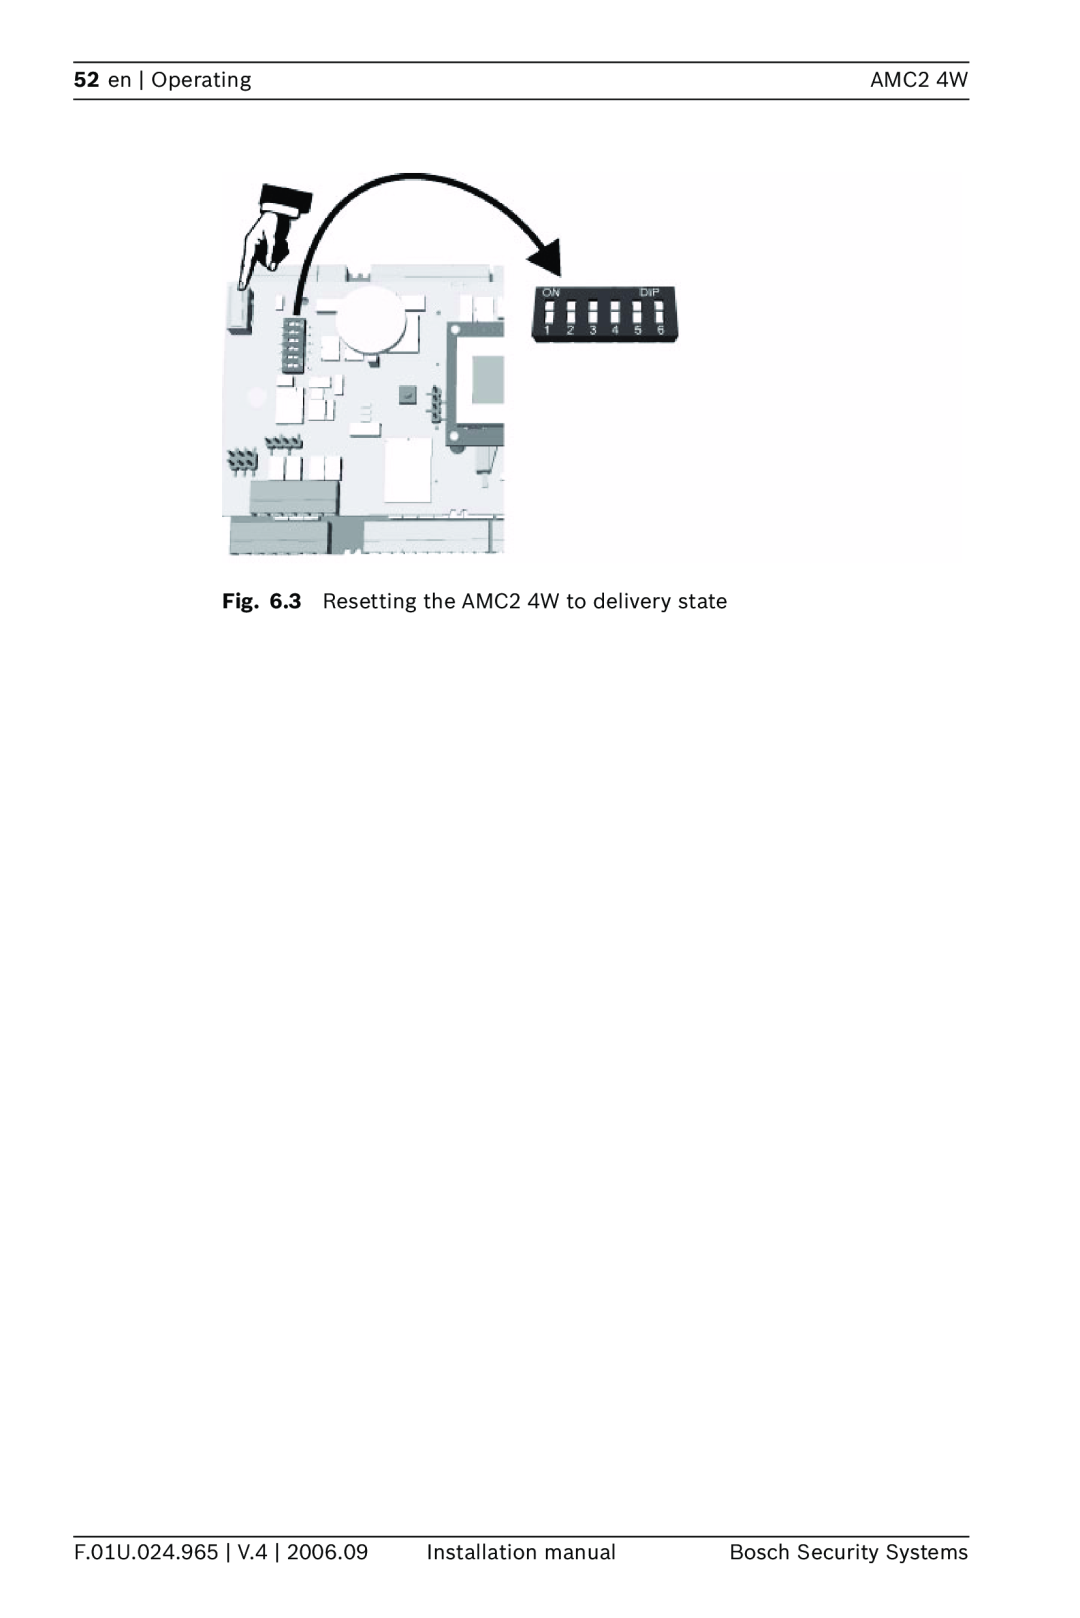 Bosch Appliances APC-AMC2-4WCF, APC-AMC2-4WUS en Operating, 3 Resetting the AMC2 4W to delivery state, F.01U.024.965 